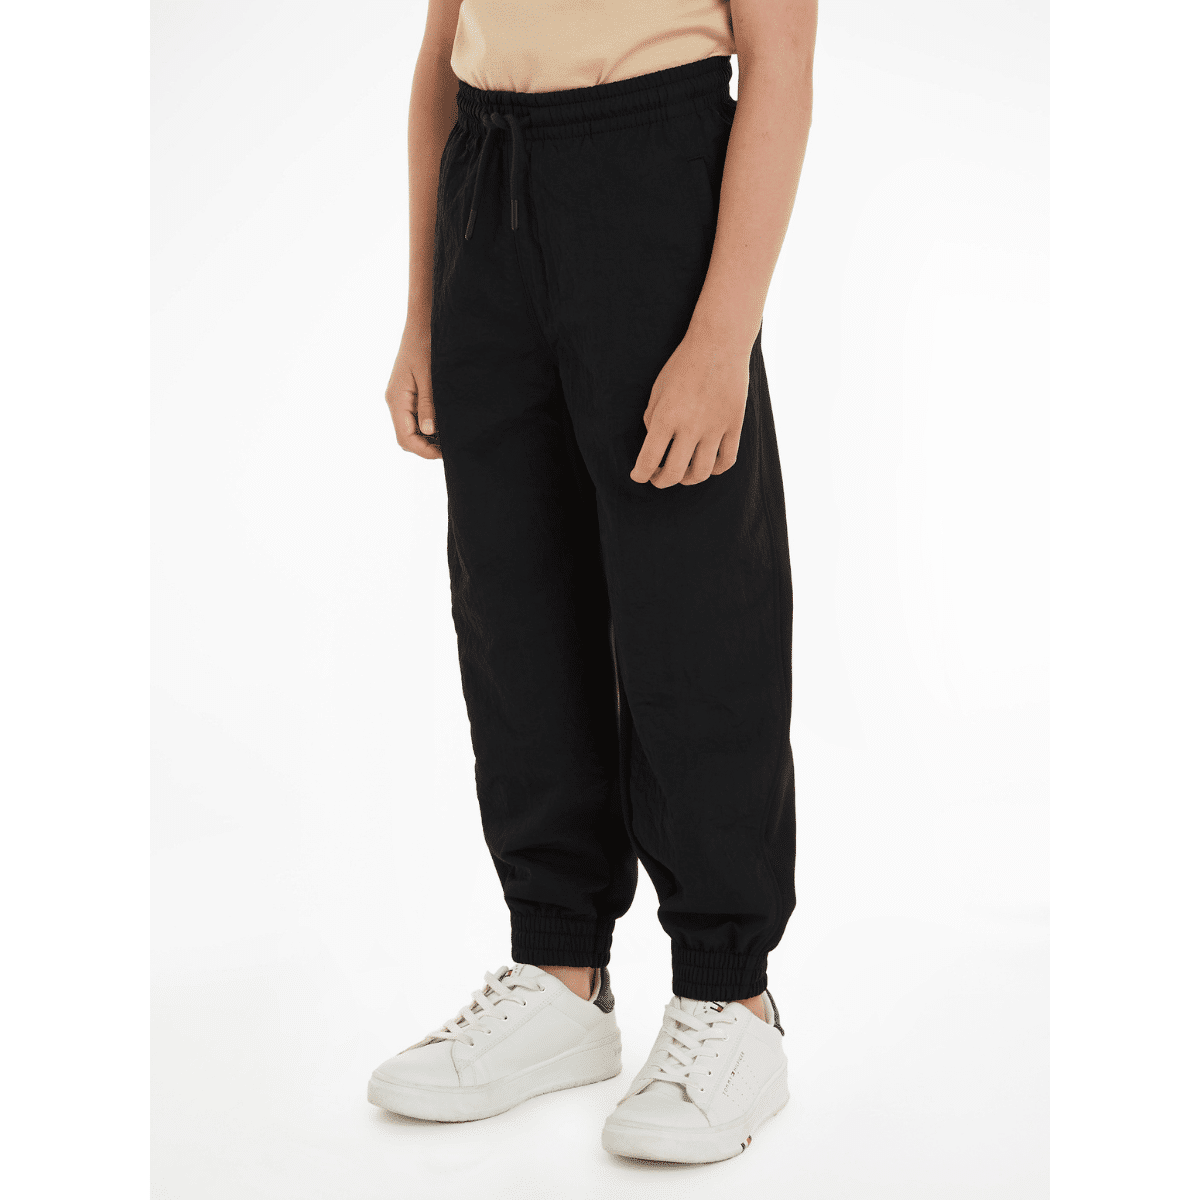 Calvin klein unisex childrens black joggers on model with white trainers